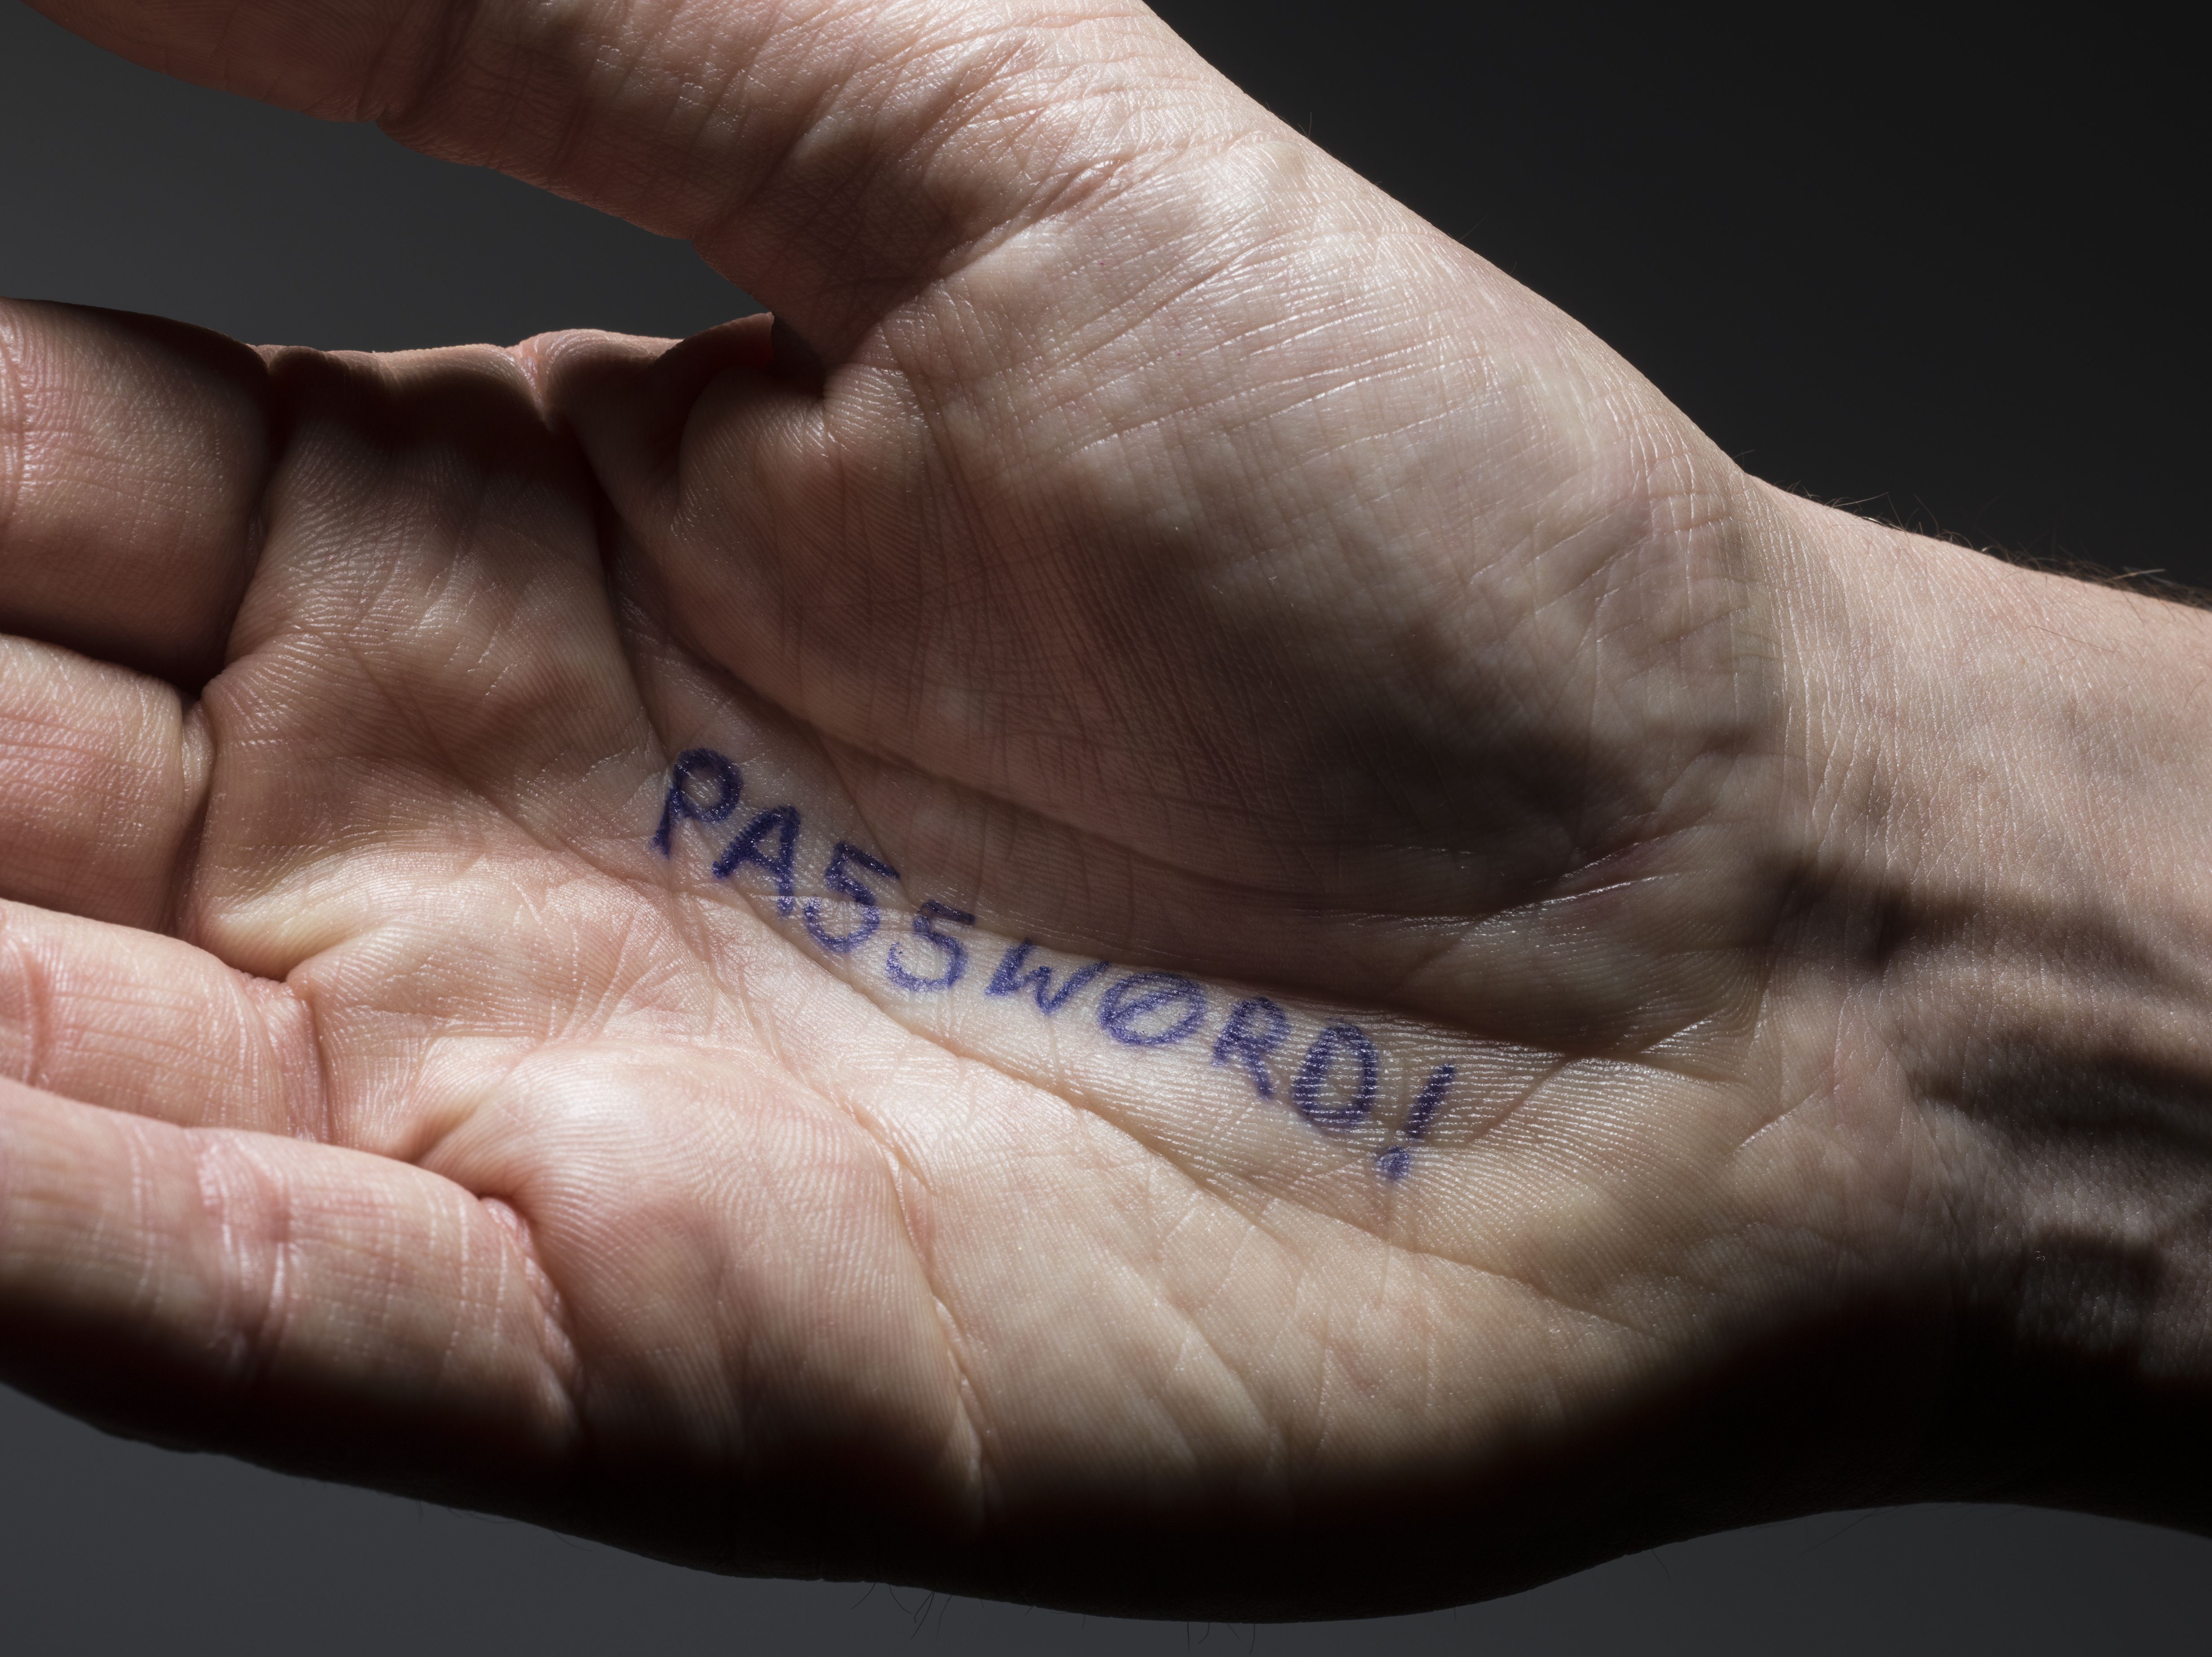 good passwords to use